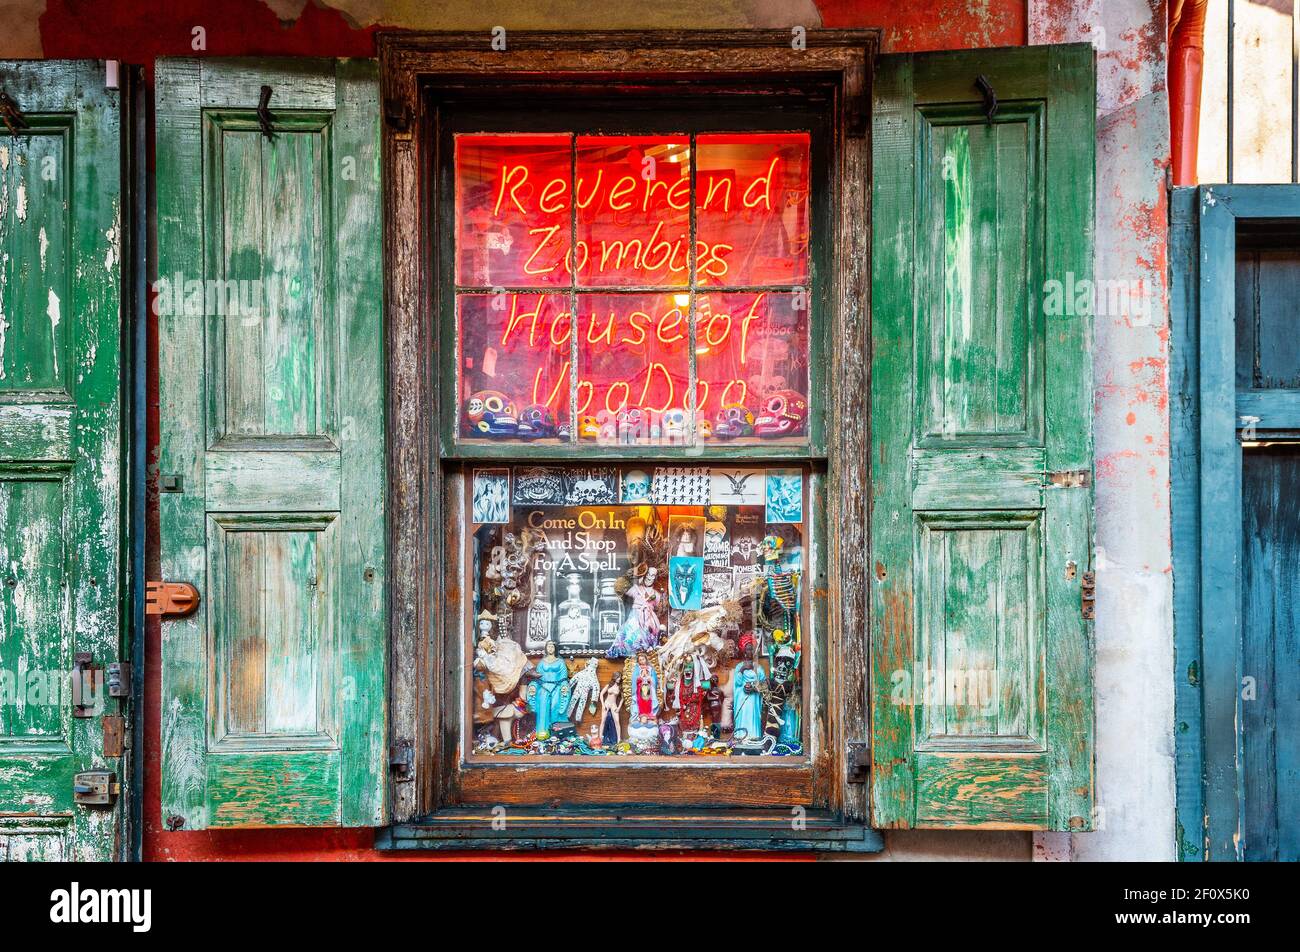 New Orleans Voodoo Shop, Reverend Zombies House of Voodoo im French Quarter. Stockfoto